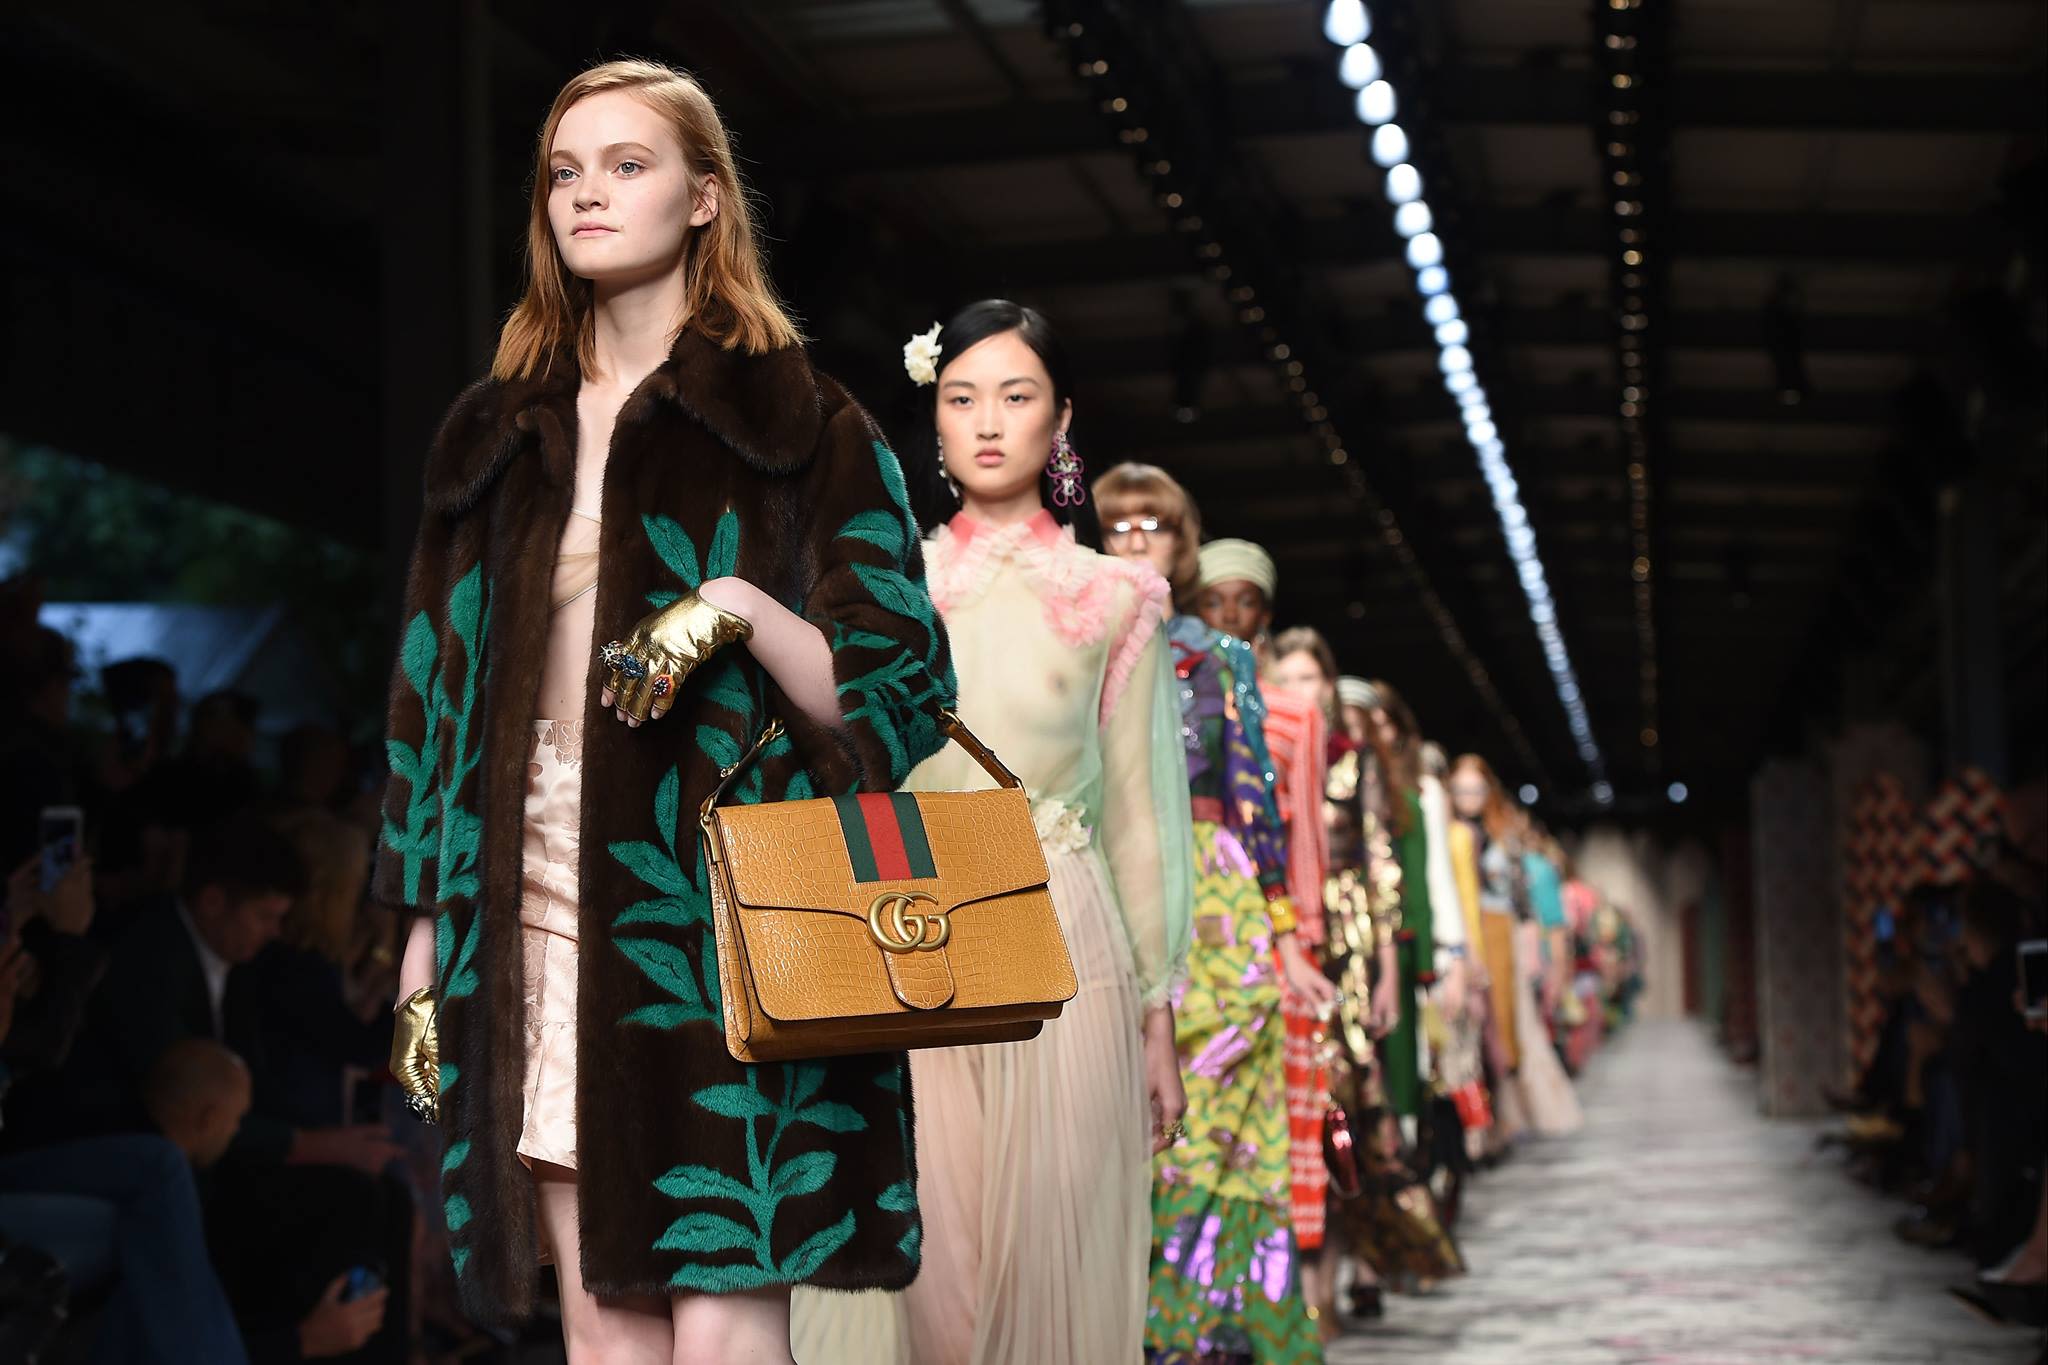 Gucci Is Going Fur-Free - Gucci Bans The Use Of Animal Fur